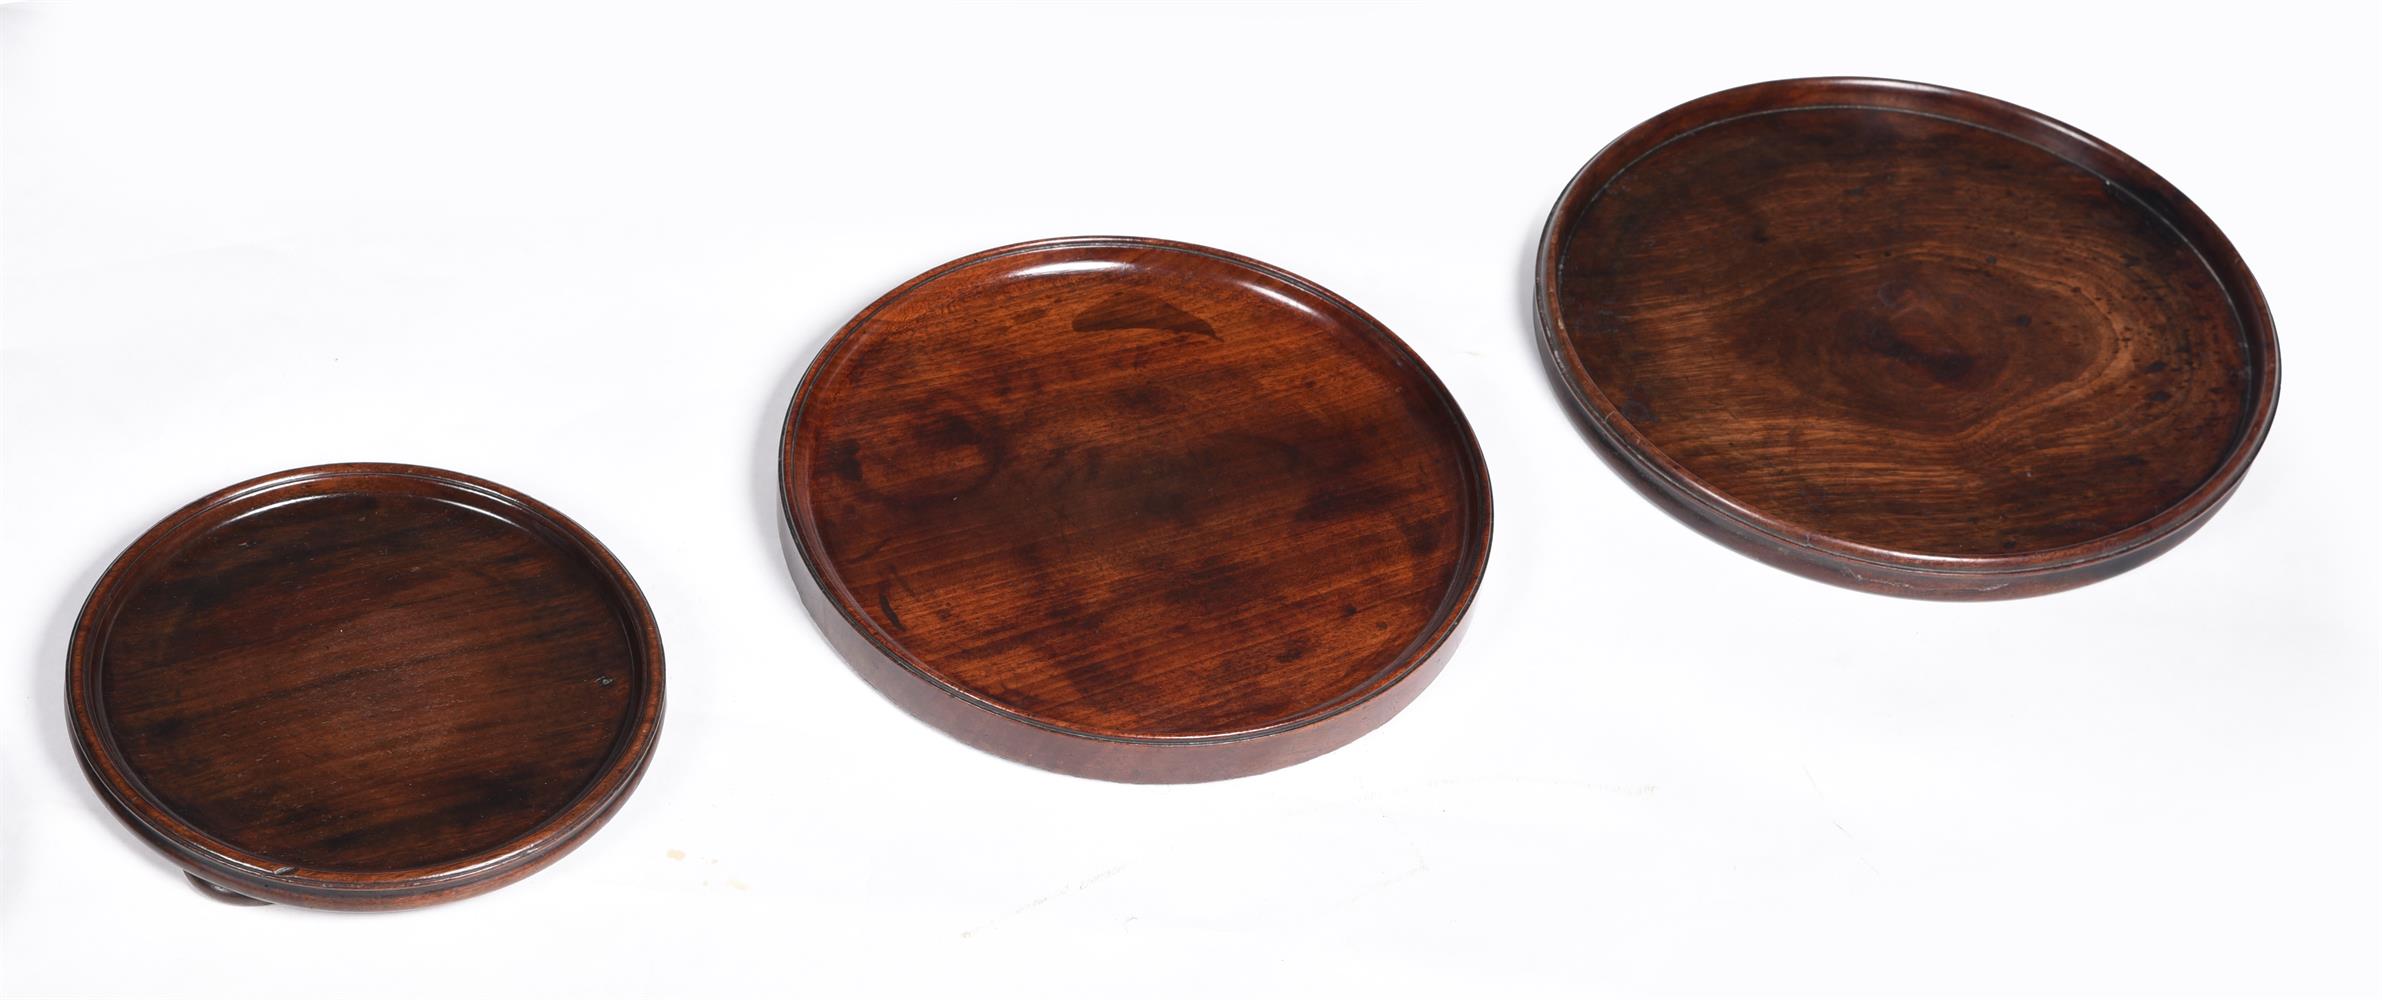 SIX MAHOGANY COASTERS AND STANDS, 18TH CENTURY AND LATER - Image 3 of 5